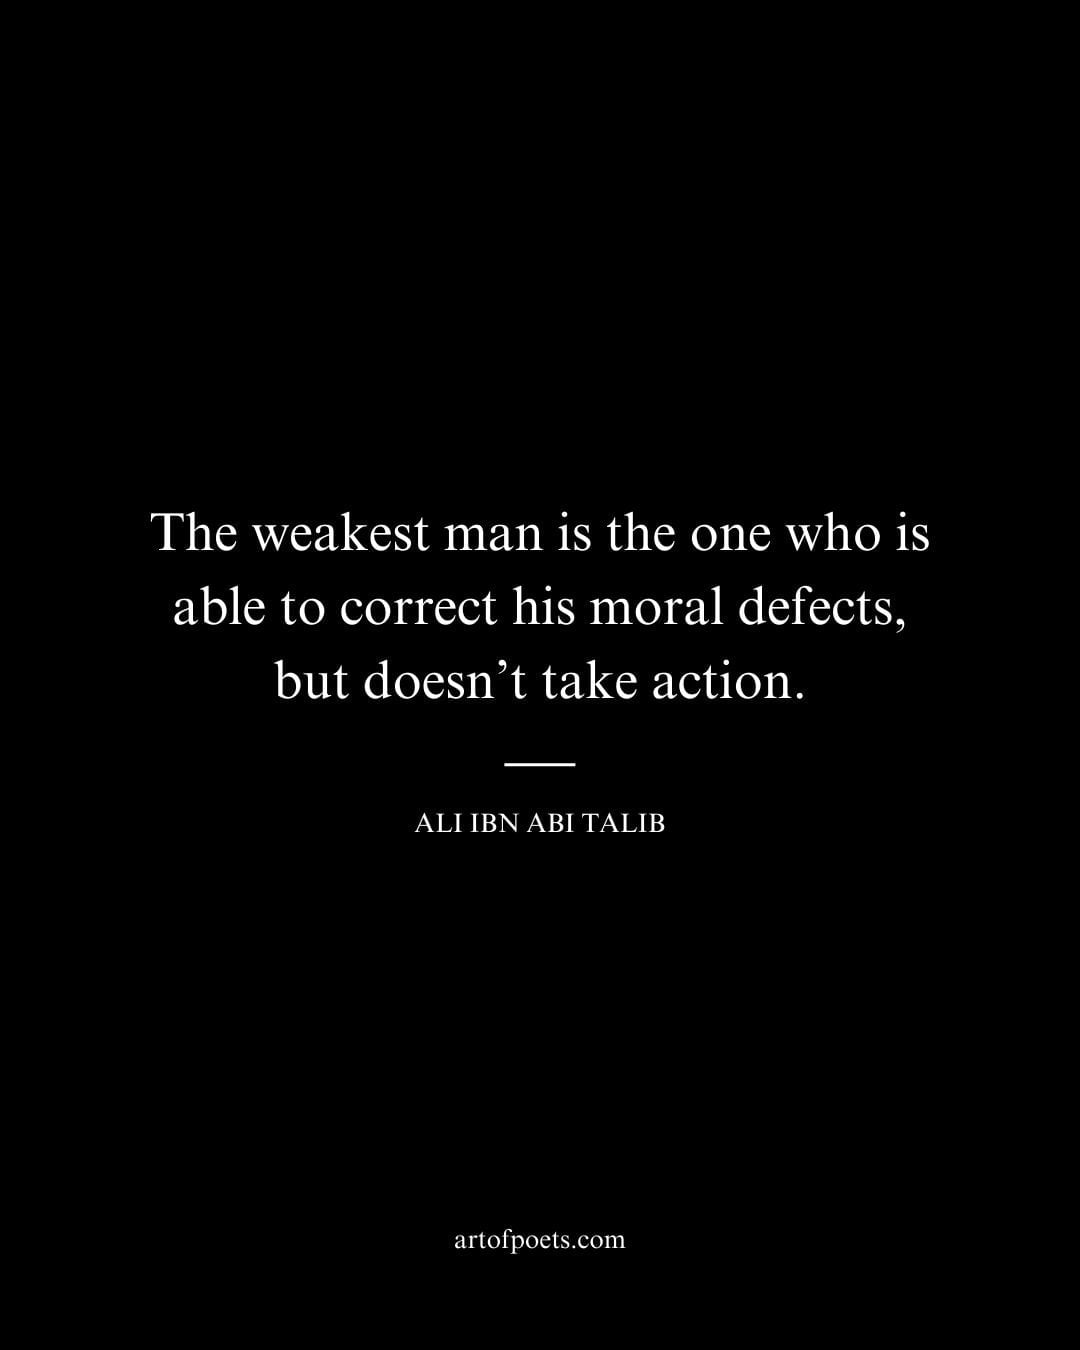 The weakest man is the one who is able to correct his moral defects but doesnt take action